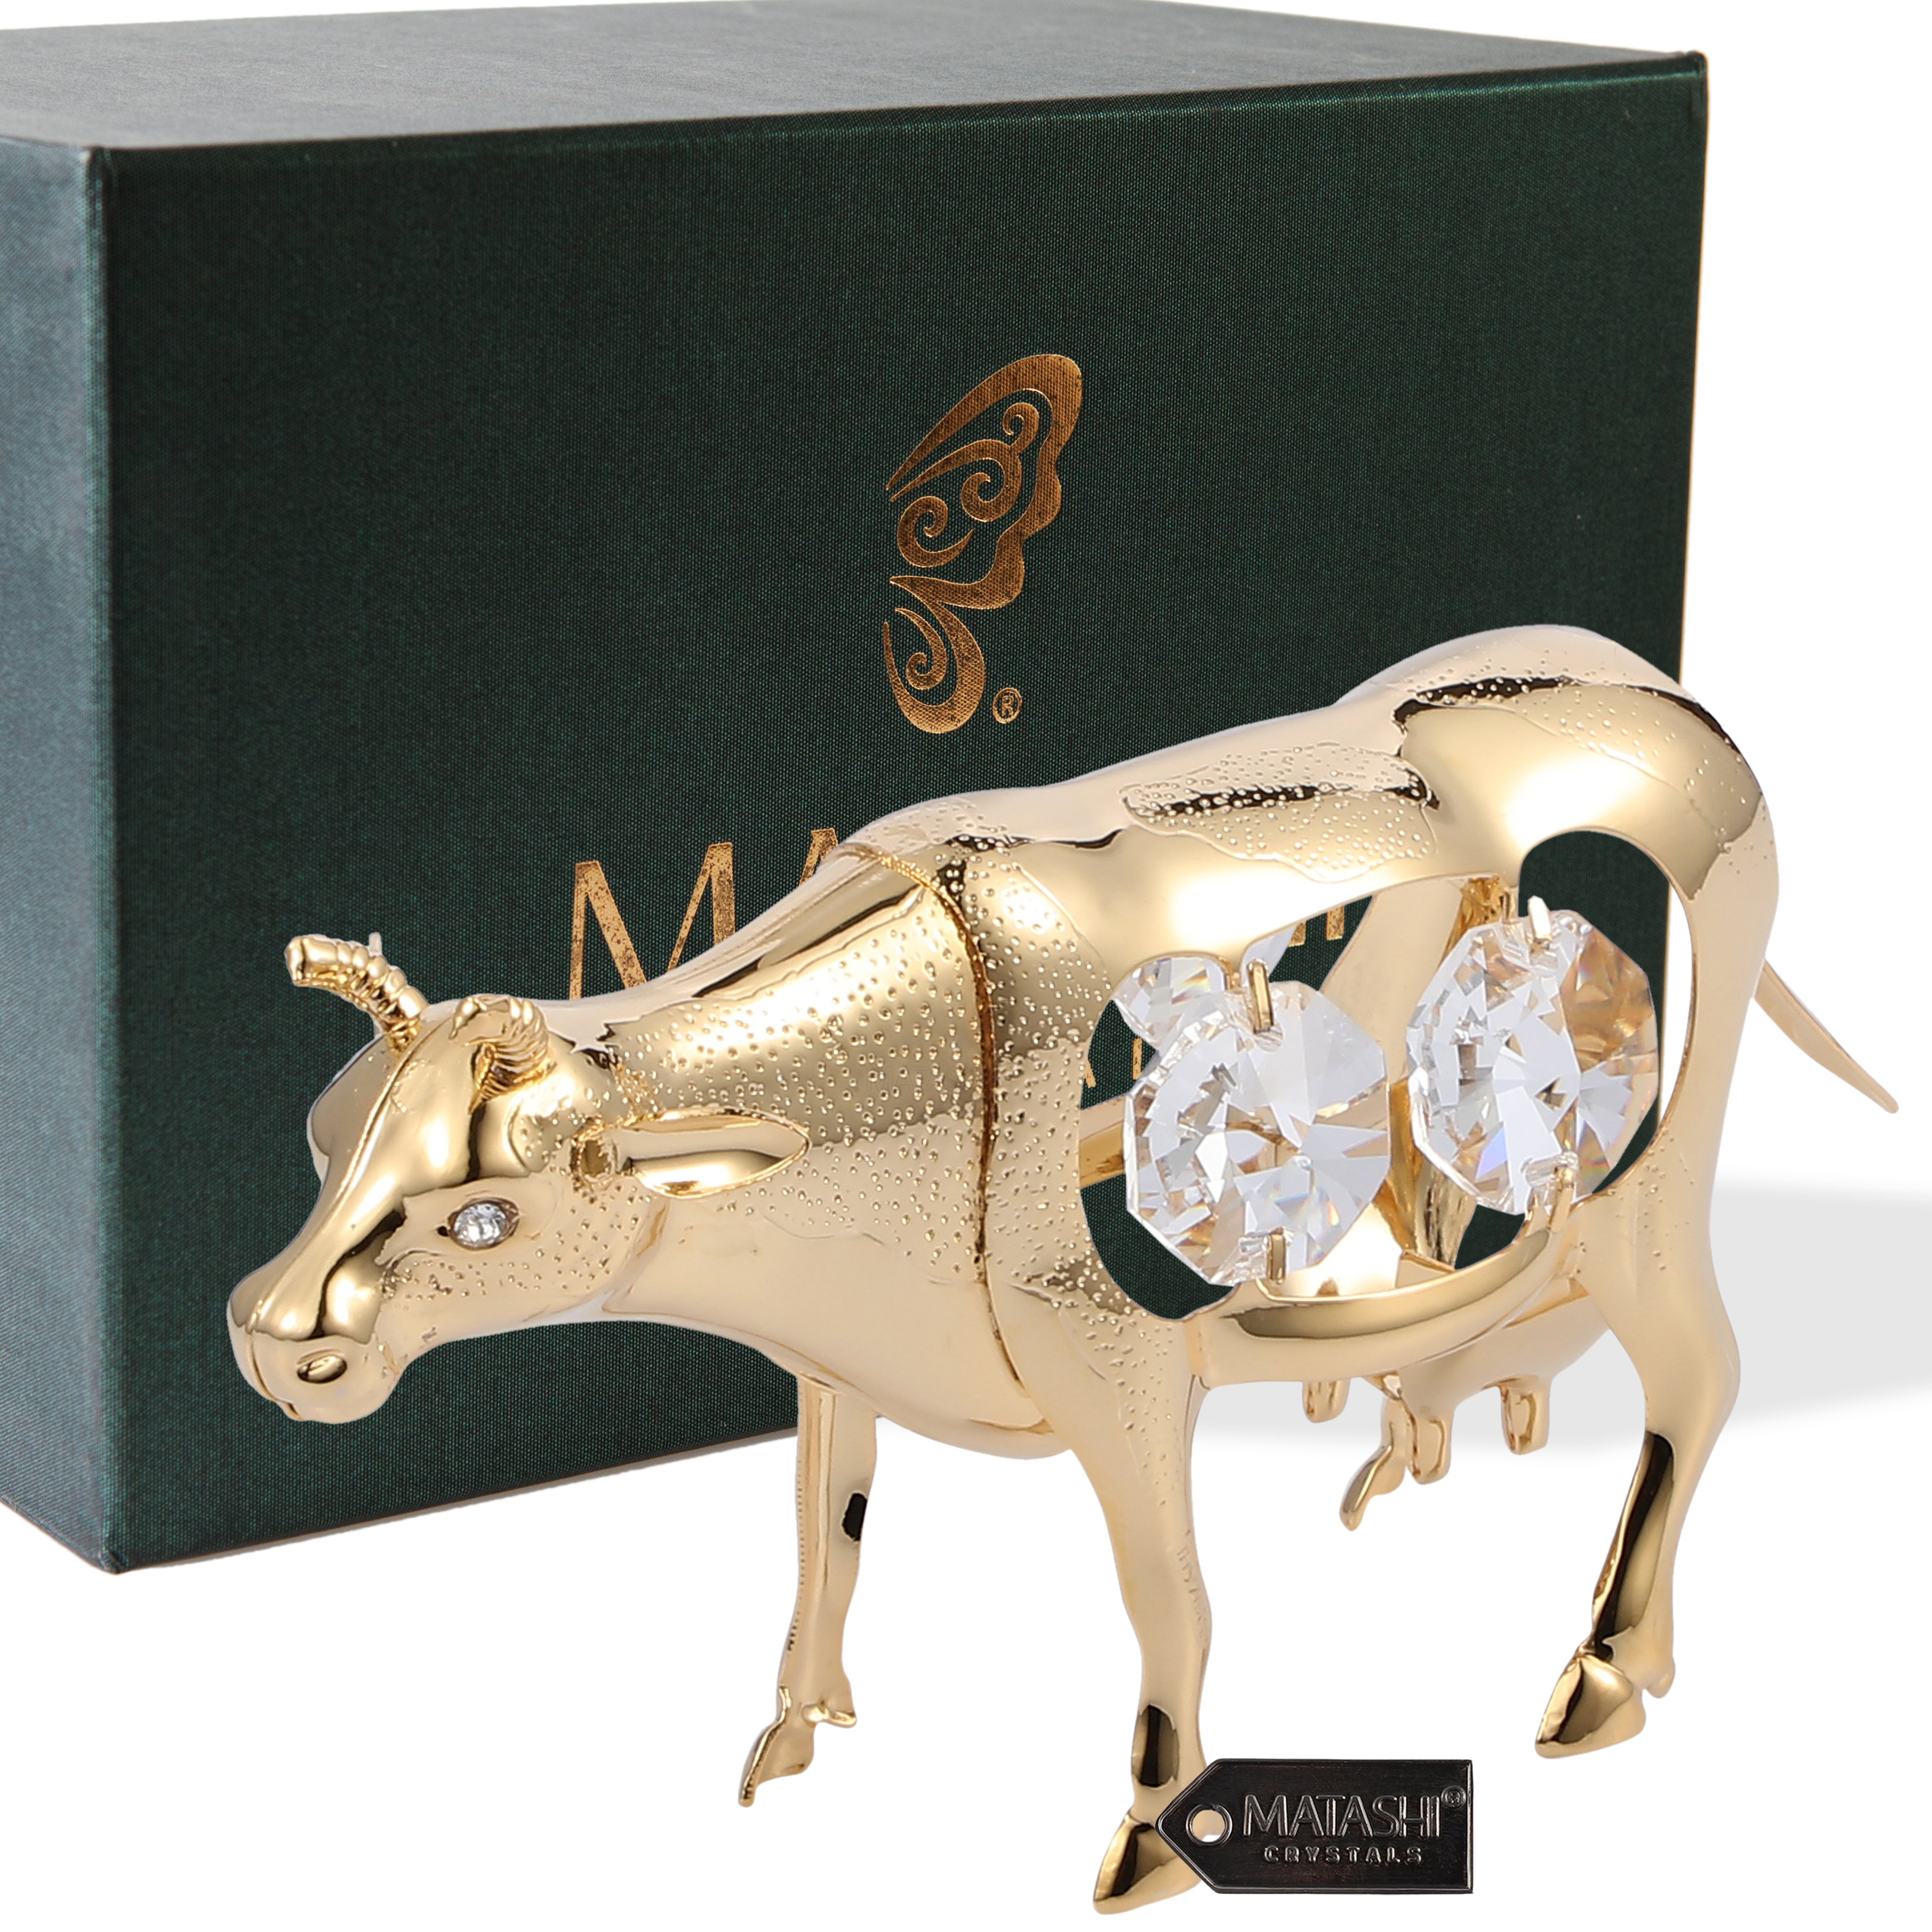 Matashi 24K Gold Plated Crystal Studded Cow Figurine Ornament Tabletop Showpiece Gifts For Birthday, Mother's Day, Christmas, Anniversary